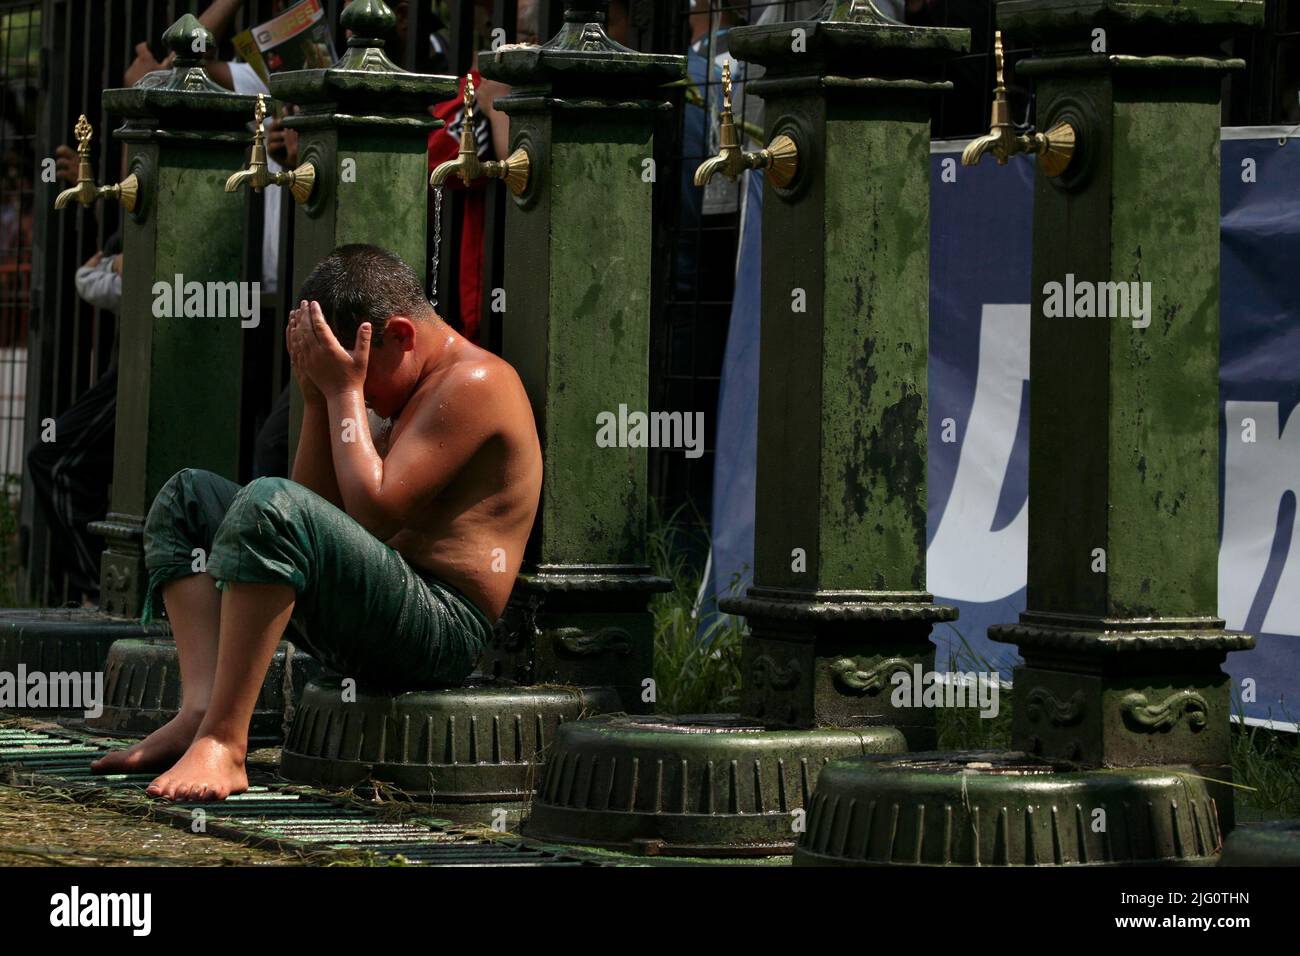 Kırkpınar (Turkish Oil Wrestling). Young wrestler cries after losing his fight sitting on the water pump during the 648th Kırkpınar Tournament in Edirne, Turkey, on 5 July 2009. Kırkpınar wrestlers compete stripped to the waist and smeared their bodies with olive oil. Stock Photo